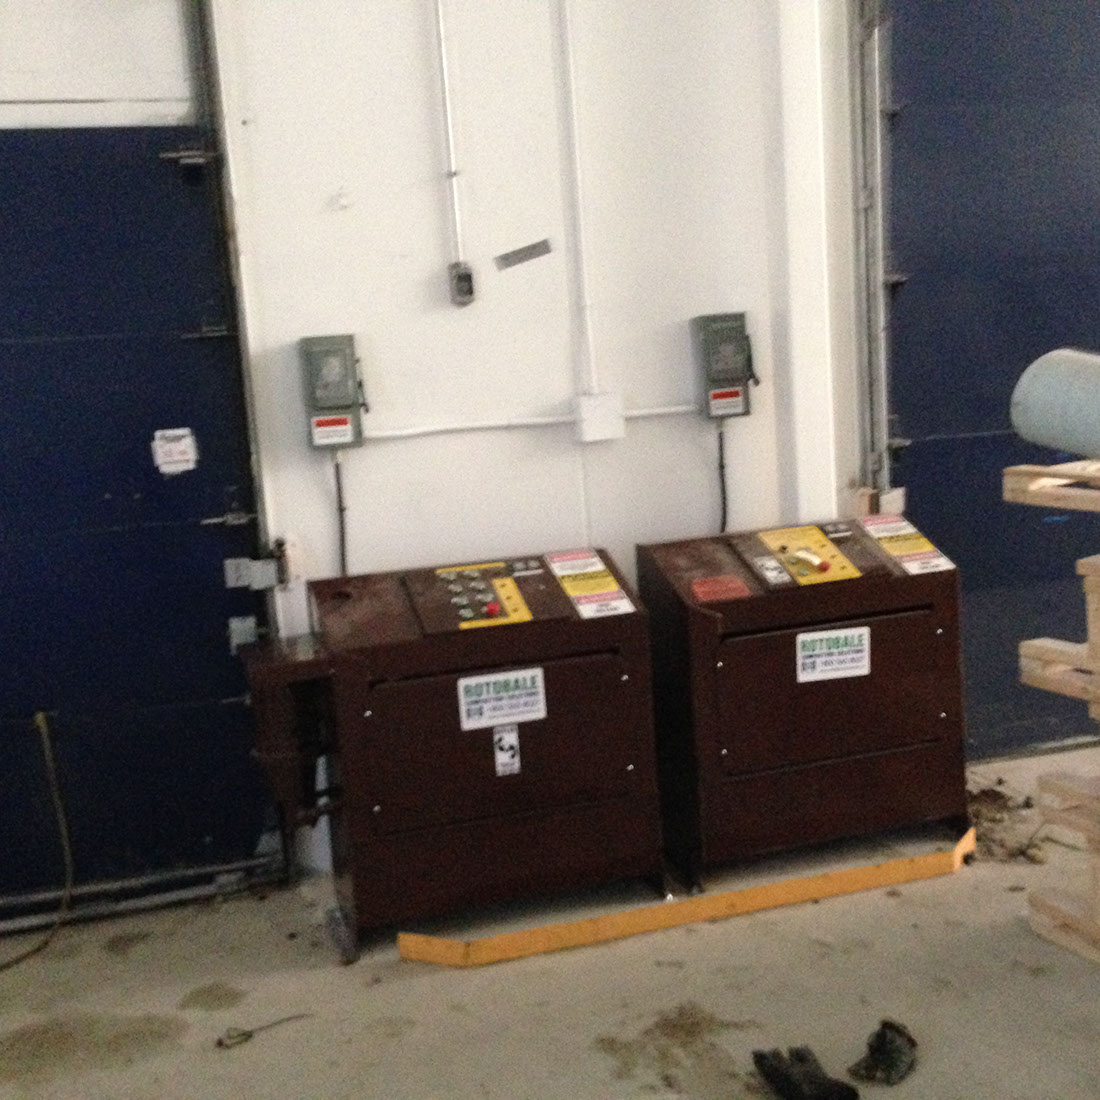 Stonemill needed two compactors